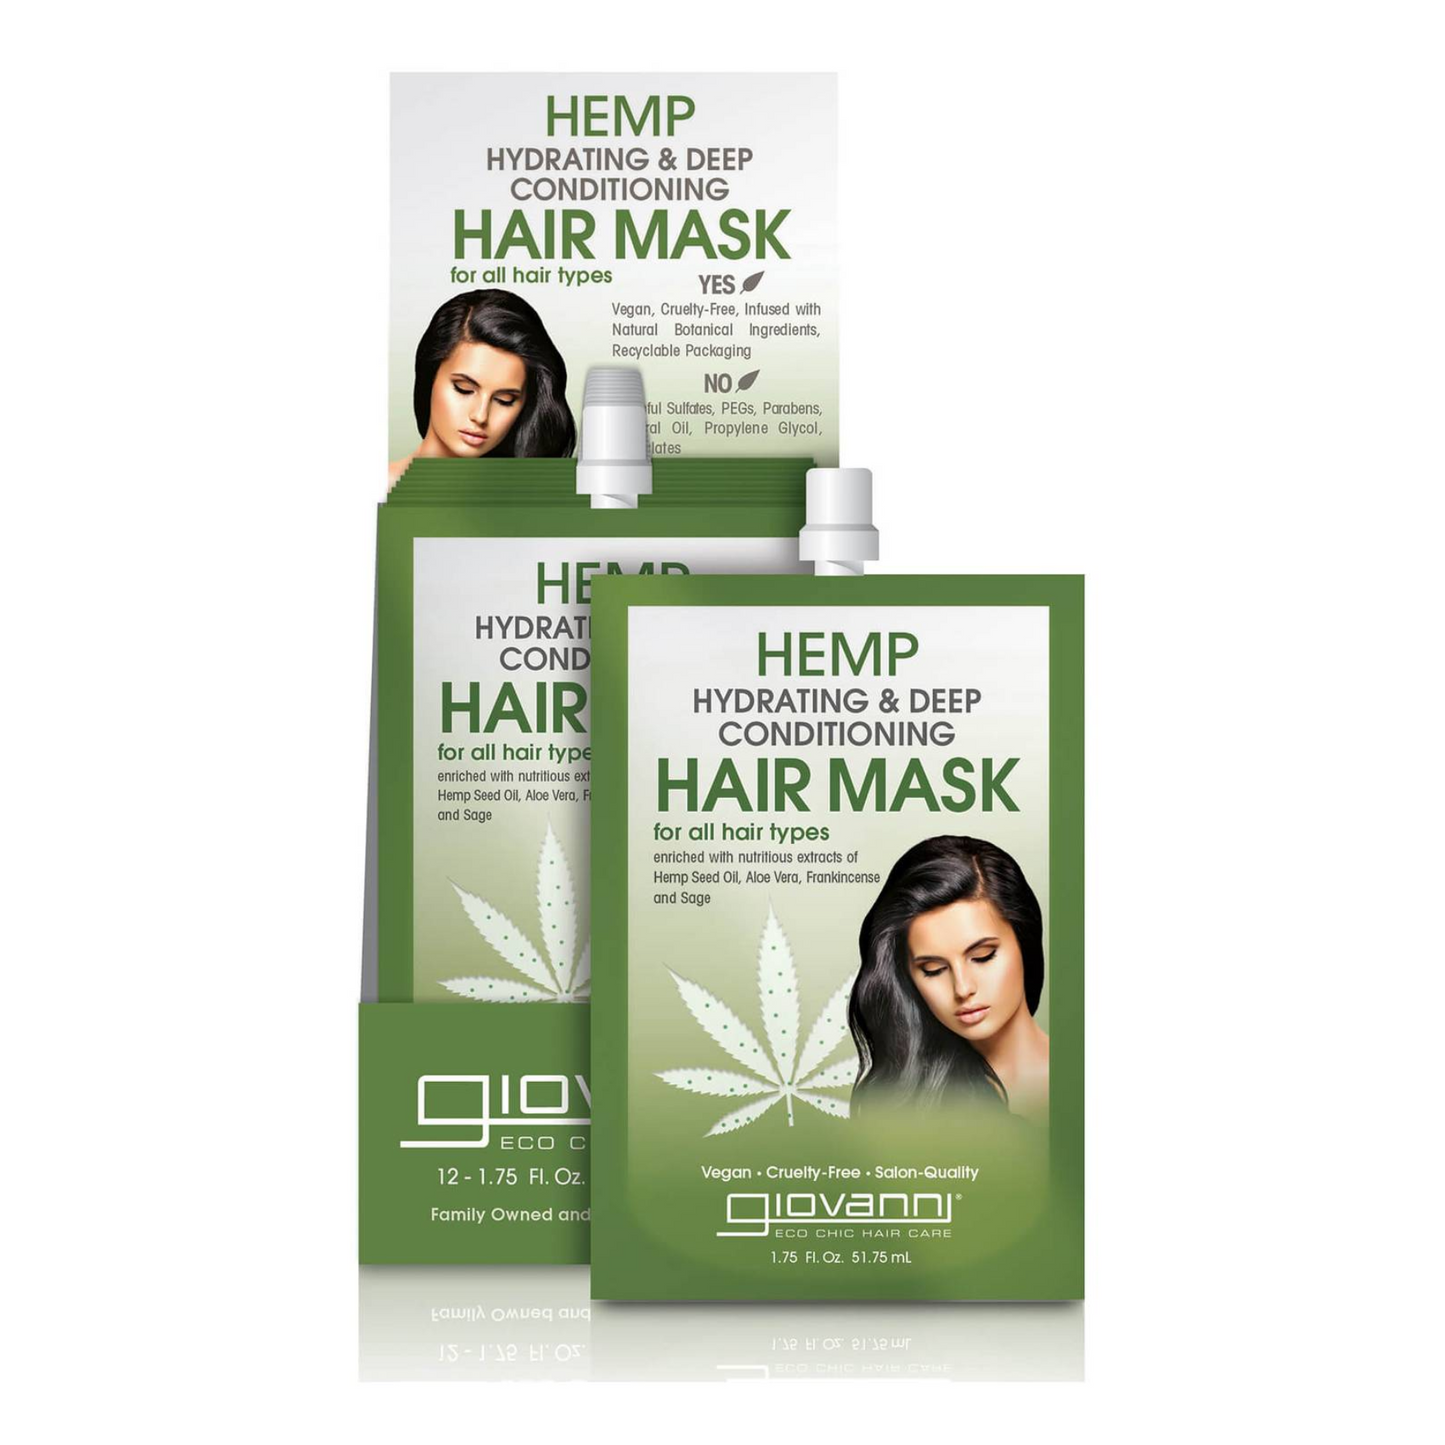 Giovanni Hemp Hydrating Deep Conditioning Hair Mask 52mL, For All Hair Types